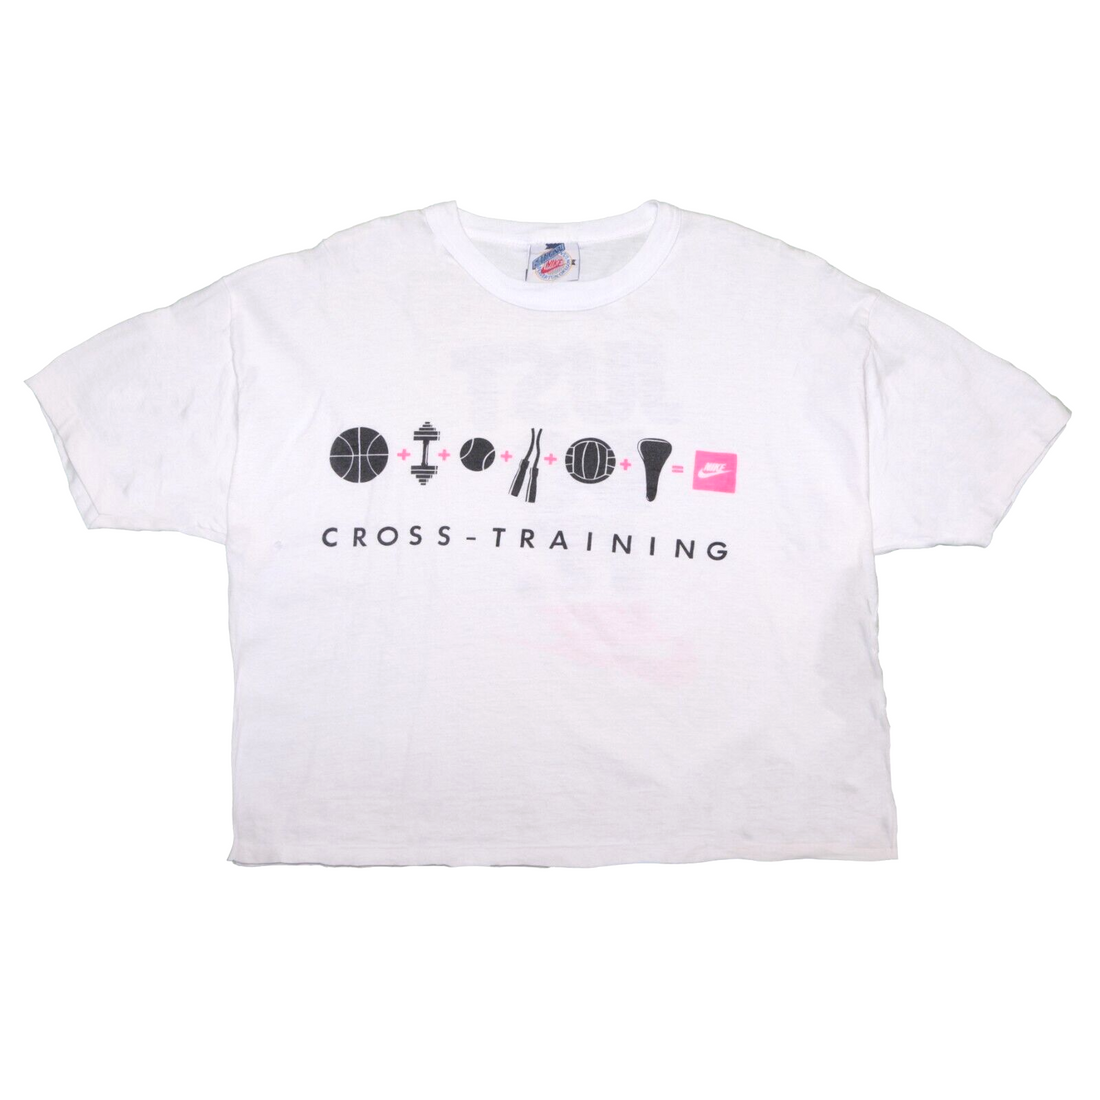 Vintage Nike Cross Training Just Do It T-Shirt Size Small 80s 90s Cropped